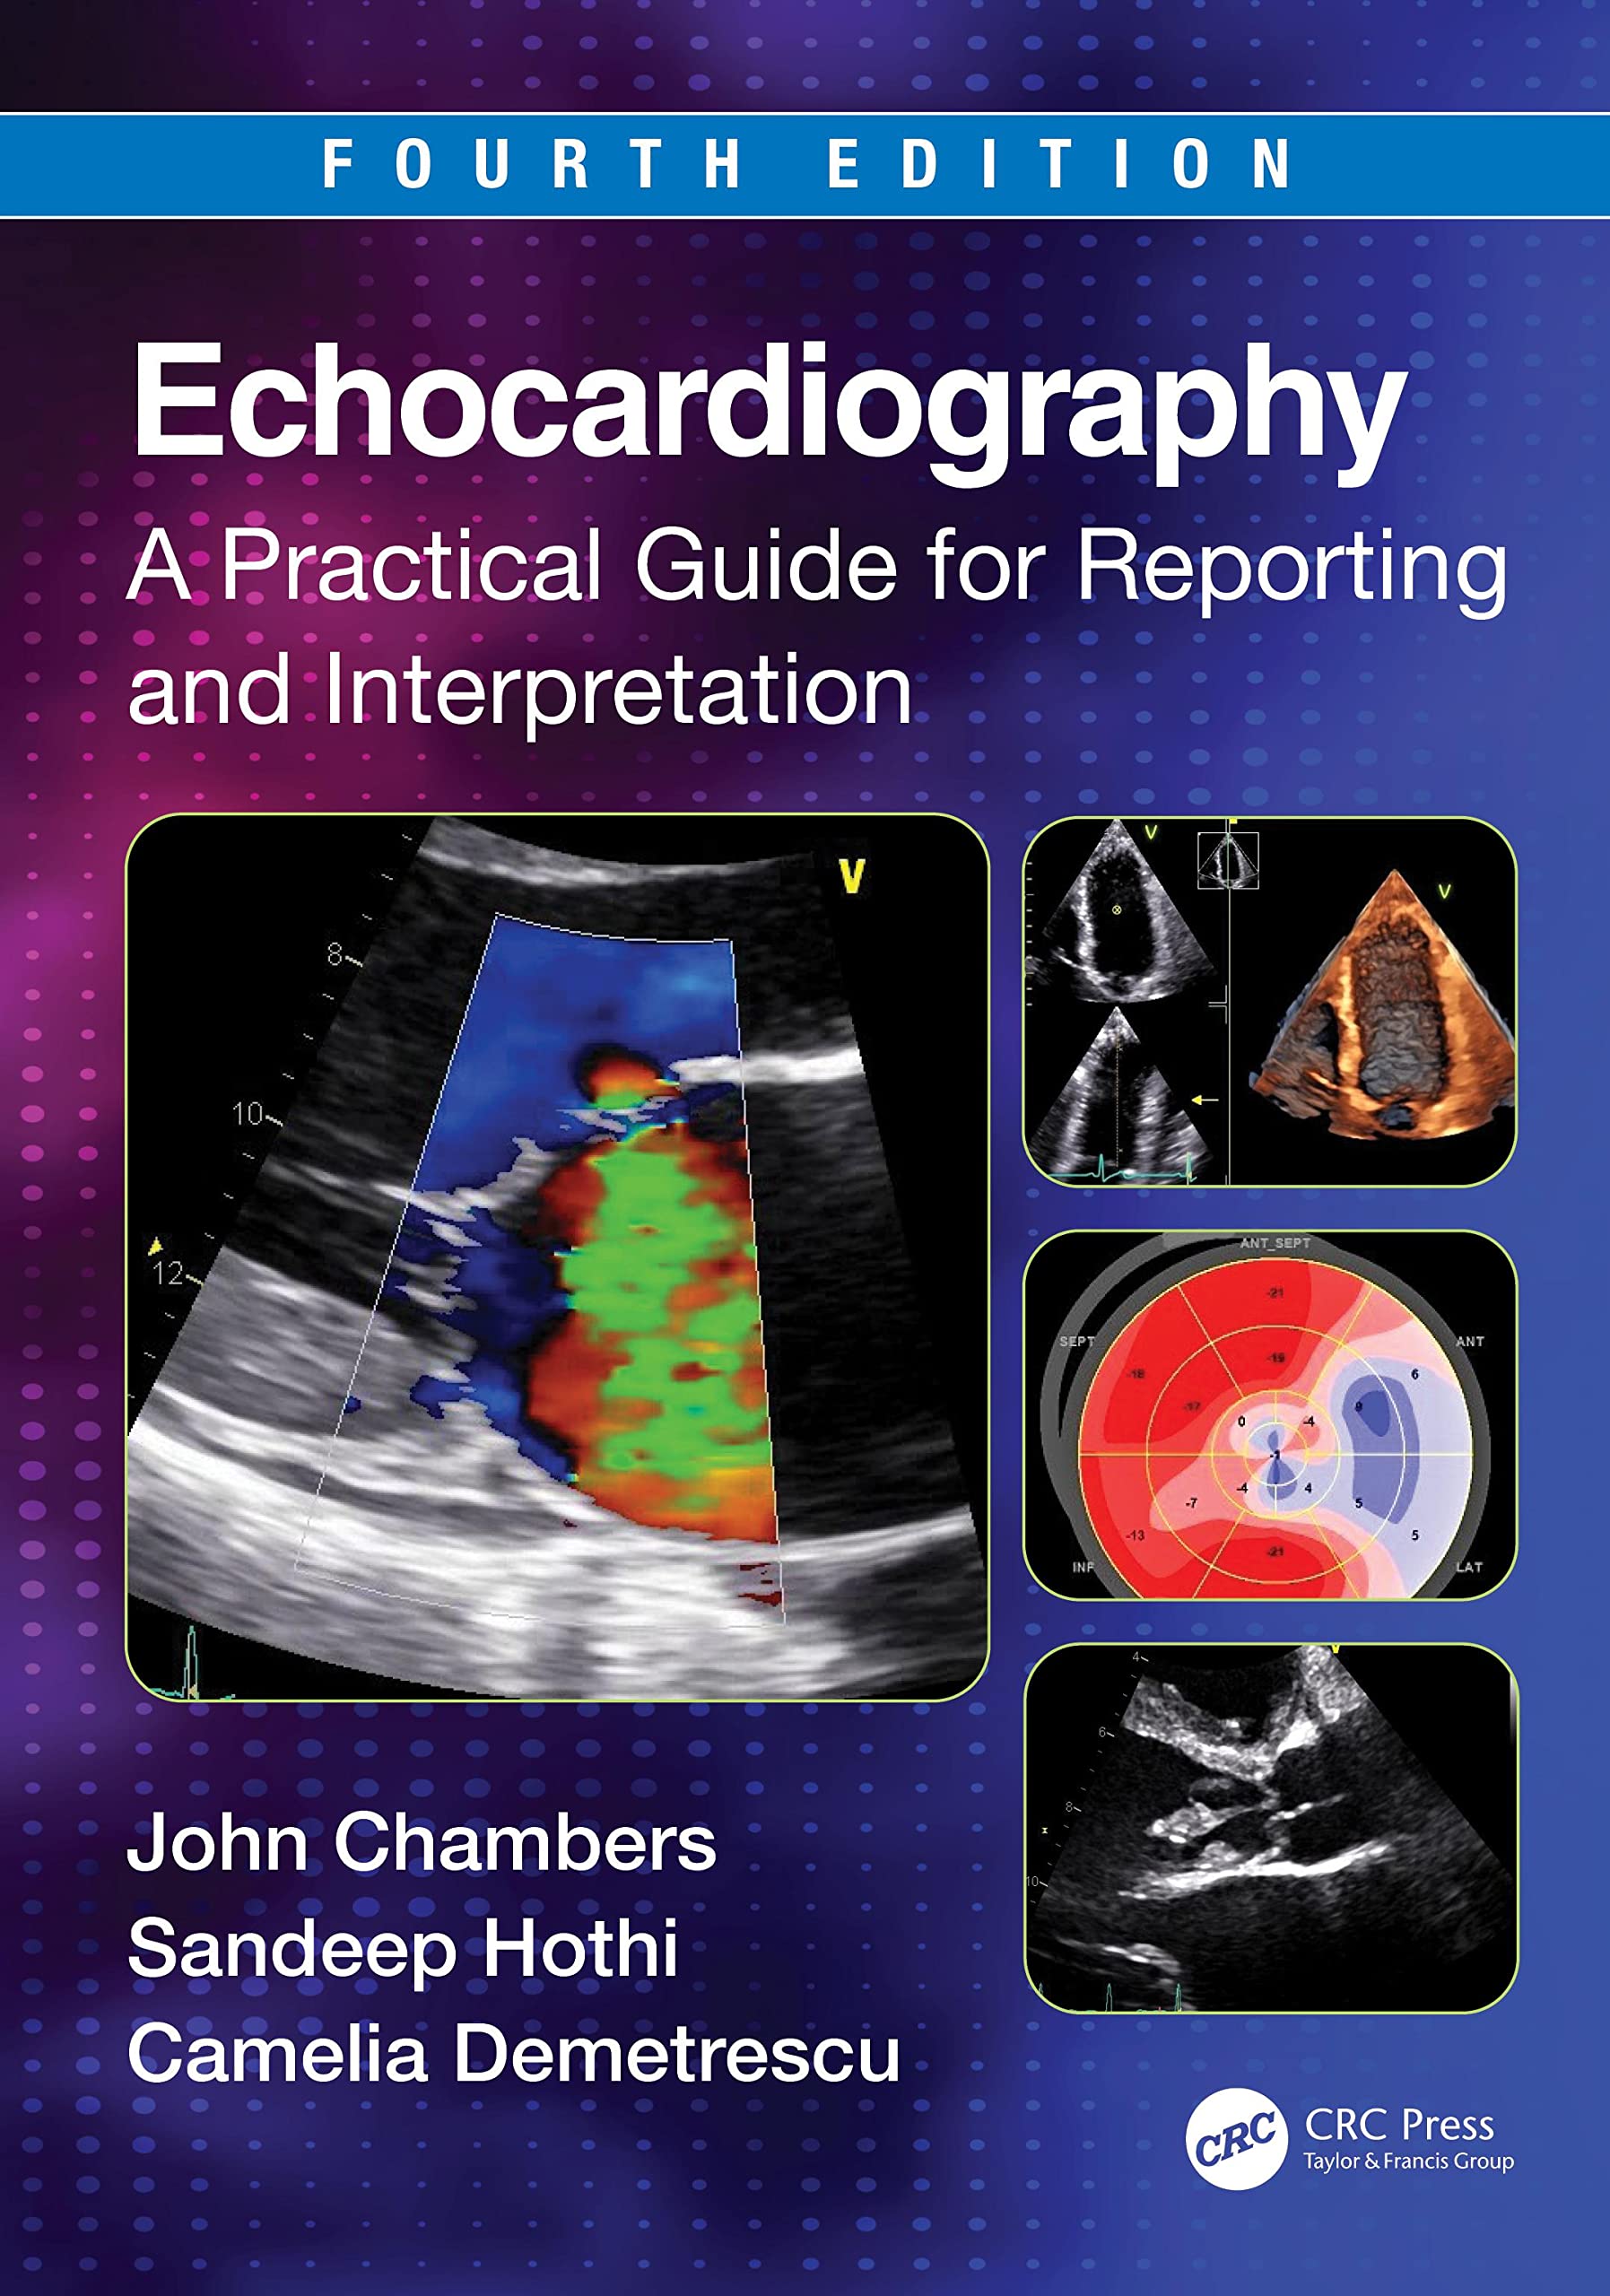 Echocardiography: A Practical Guide for Reporting and Interpretation, 4th Edition  by John Chambers 